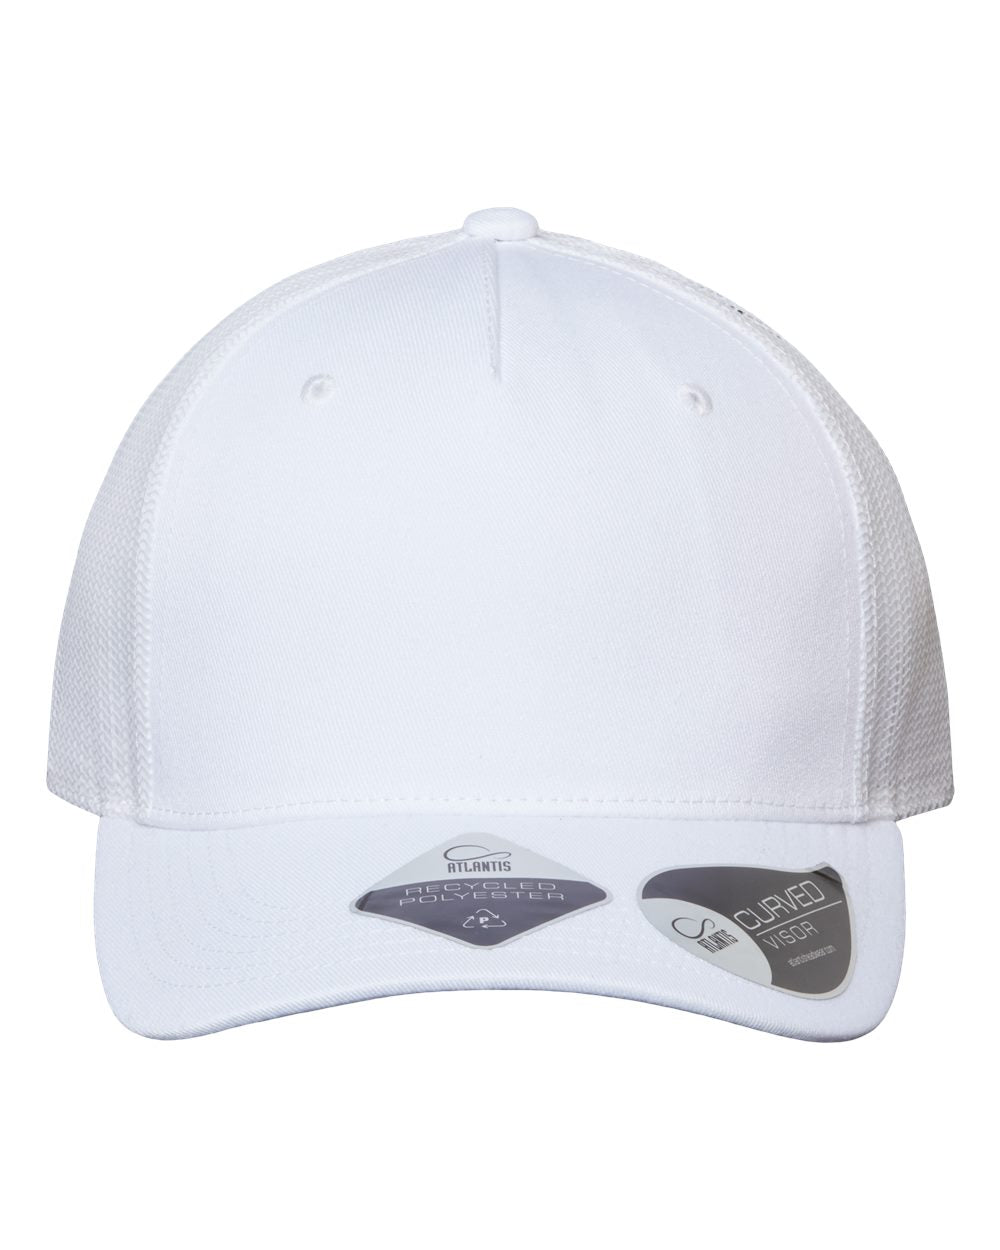 Customizable recycled polyester Atlantis truck hat in white